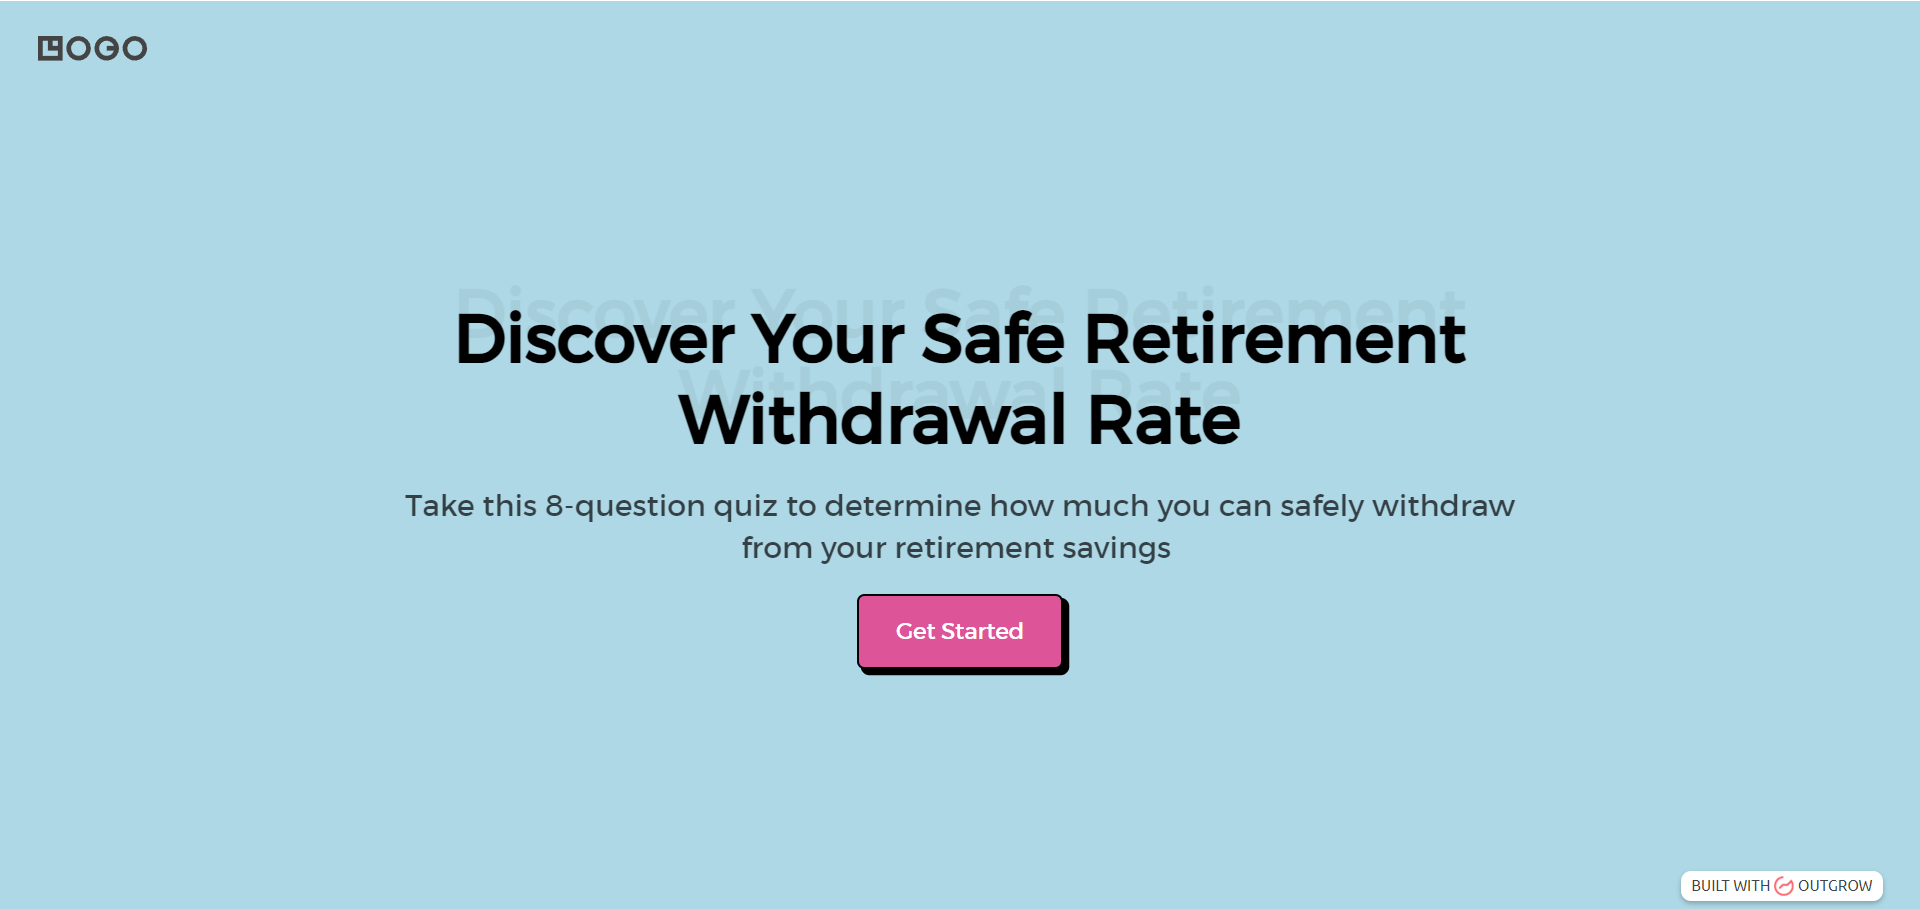 Discover Your Safe Retirement Withdrawal Rate